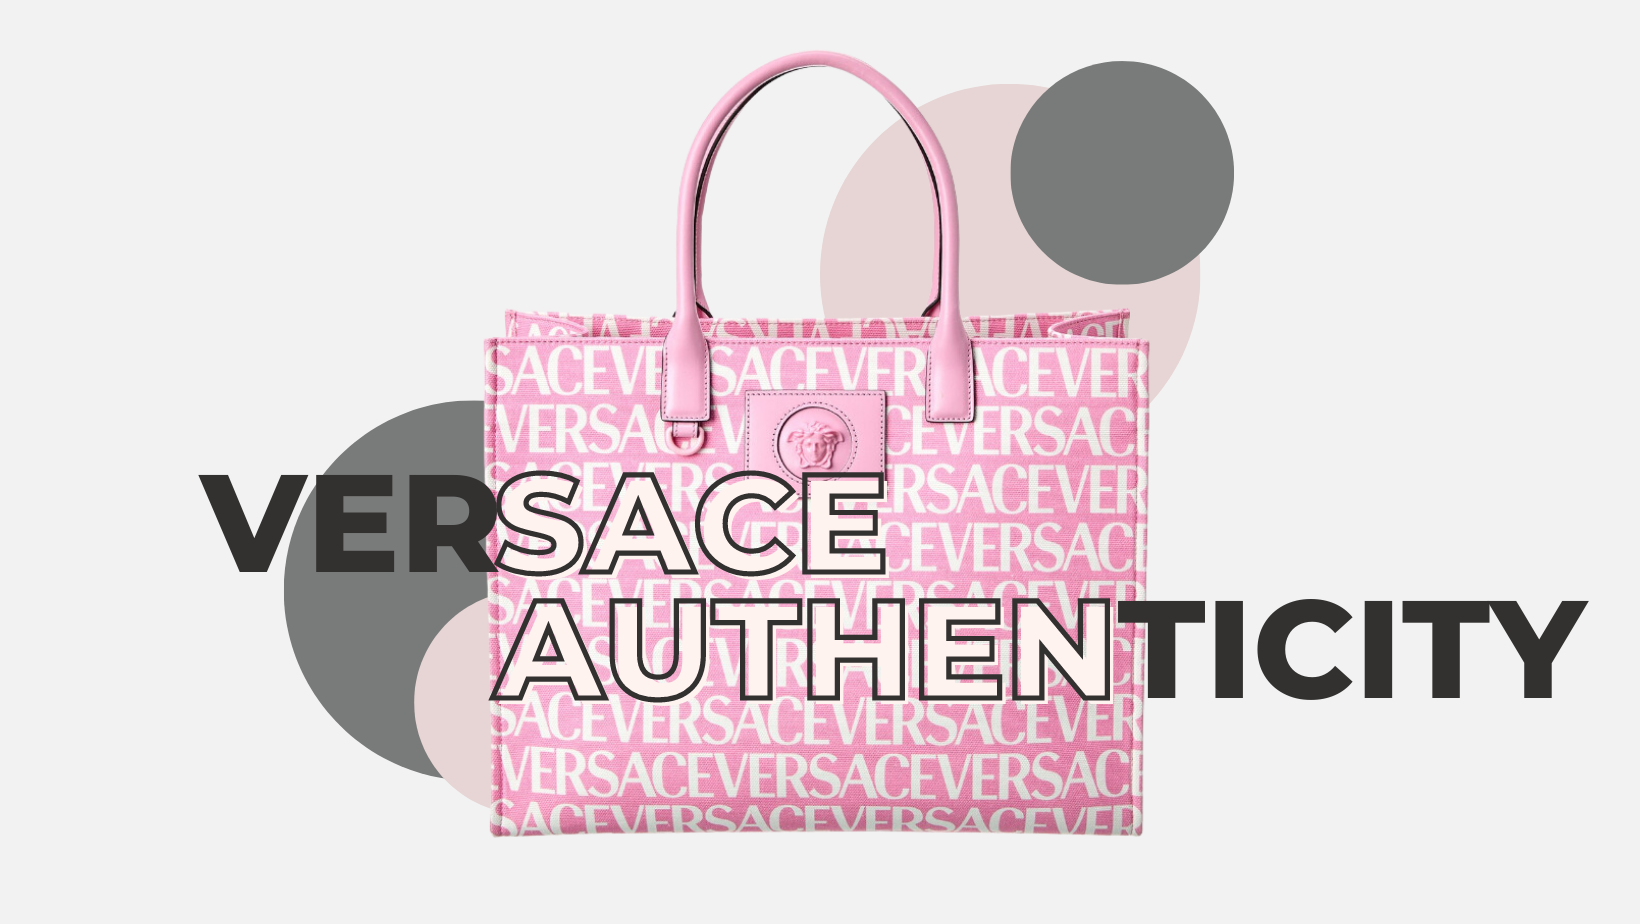 How to Verify the Authenticity of Your Versace Piece